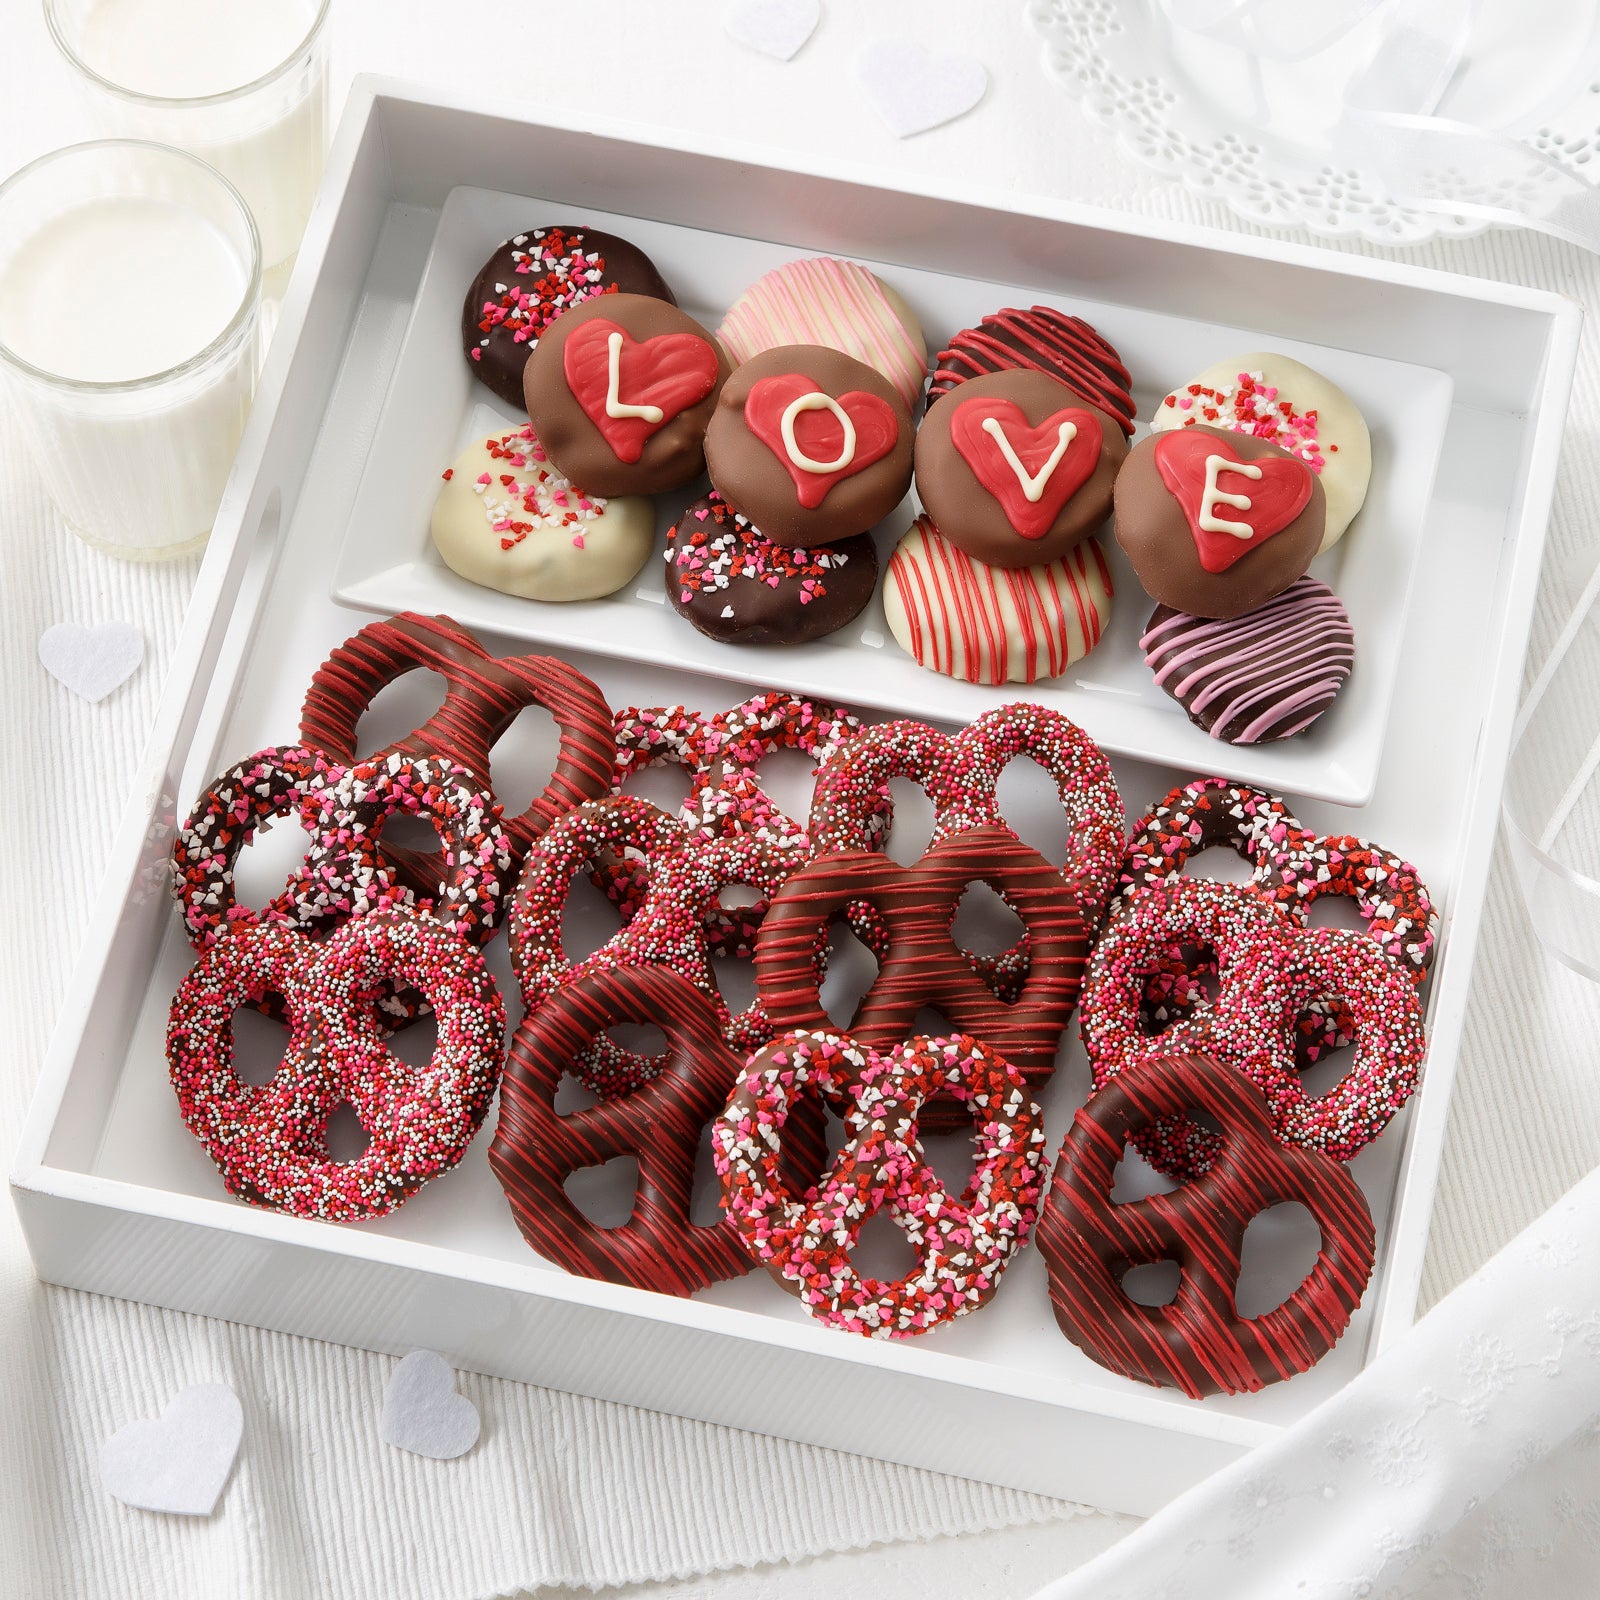 A dozen Valentine's Day themed chocolate covered nibblers and pretzels.